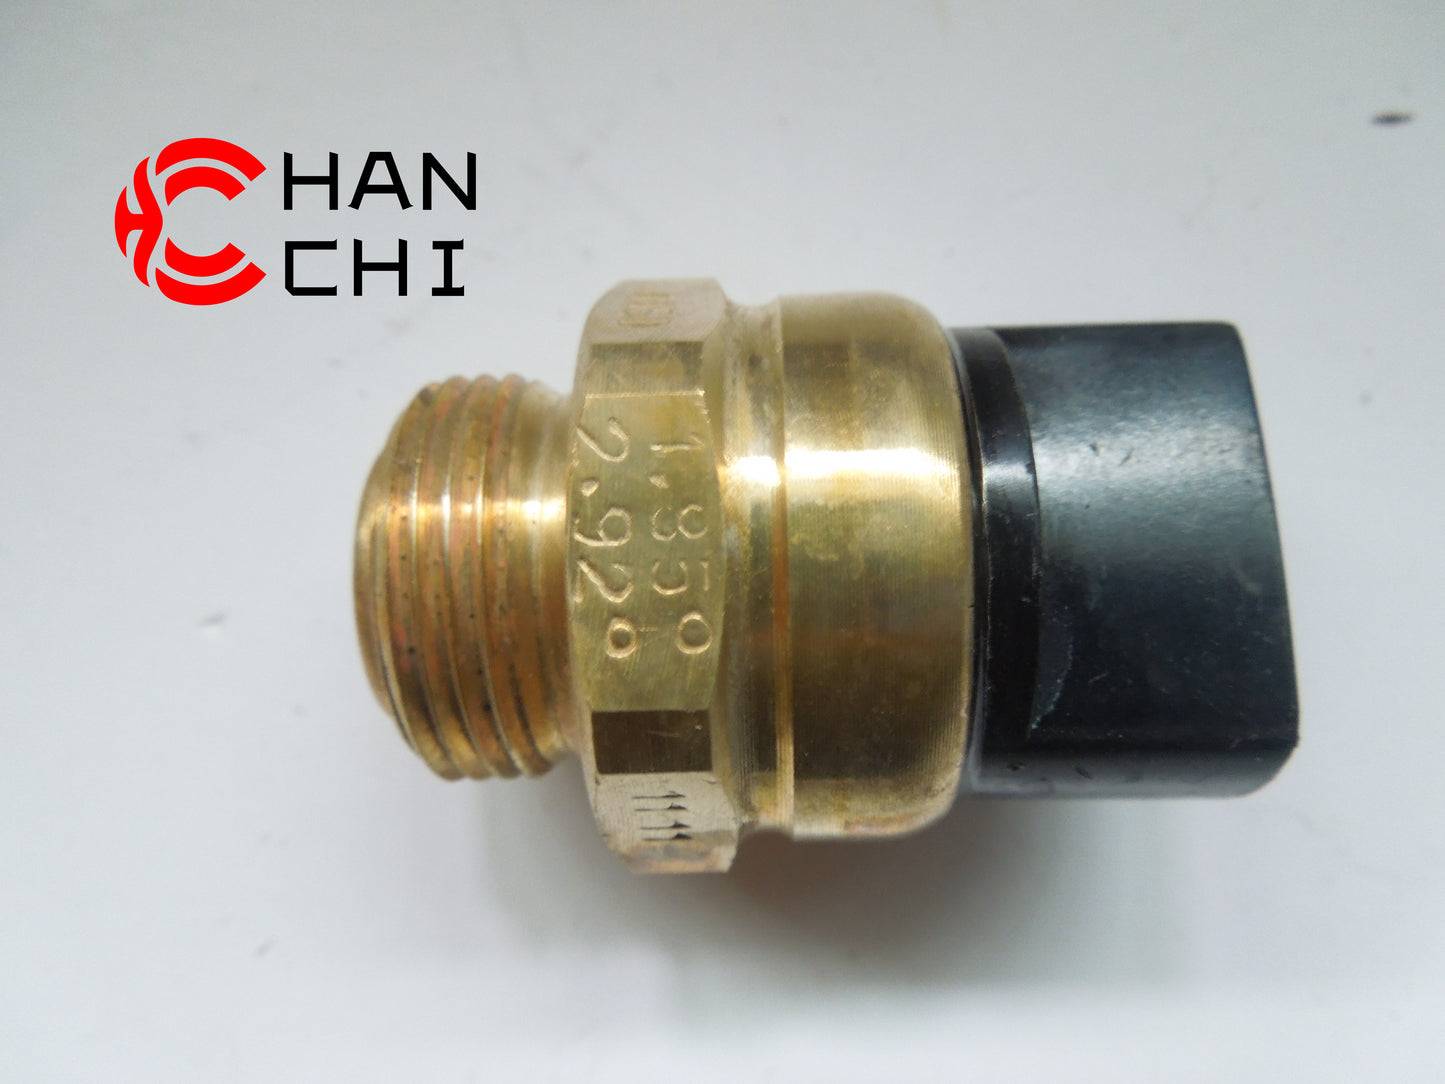 OEM: 85-92℃Material: metalColor: black goldenOrigin: Made in ChinaWeight: 50gPacking List: 1* Neutral Switch More Service We can provide OEM Manufacturing service We can Be your one-step solution for Auto Parts We can provide technical scheme for you Feel Free to Contact Us, We will get back to you as soon as possible.